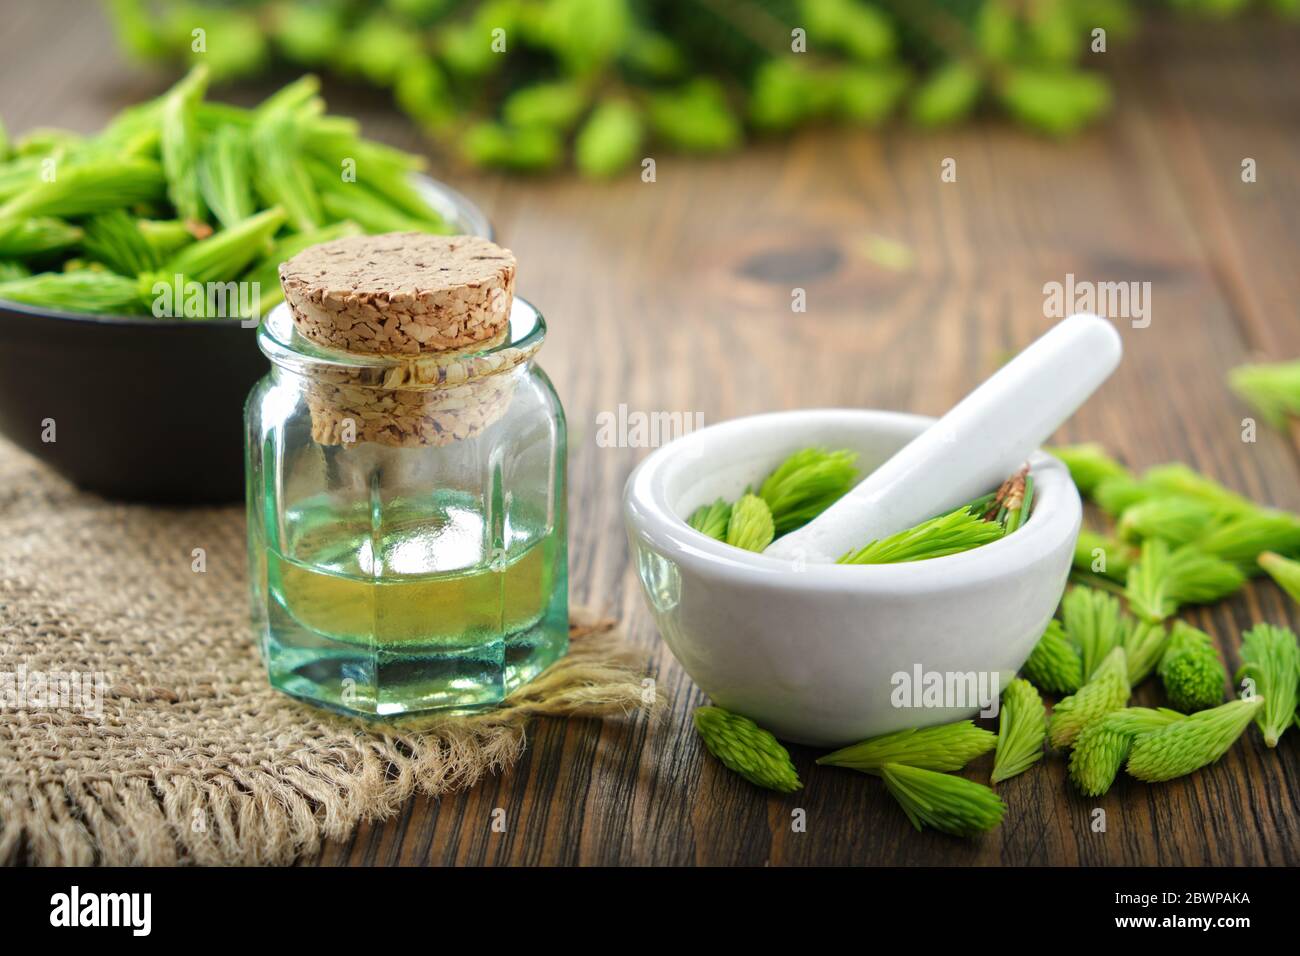 Bottle of essential oil, infusion or tincture from fir buds and needles, mortar and bowl of spruce tips, twigs of fir tree on wooden table. Stock Photo